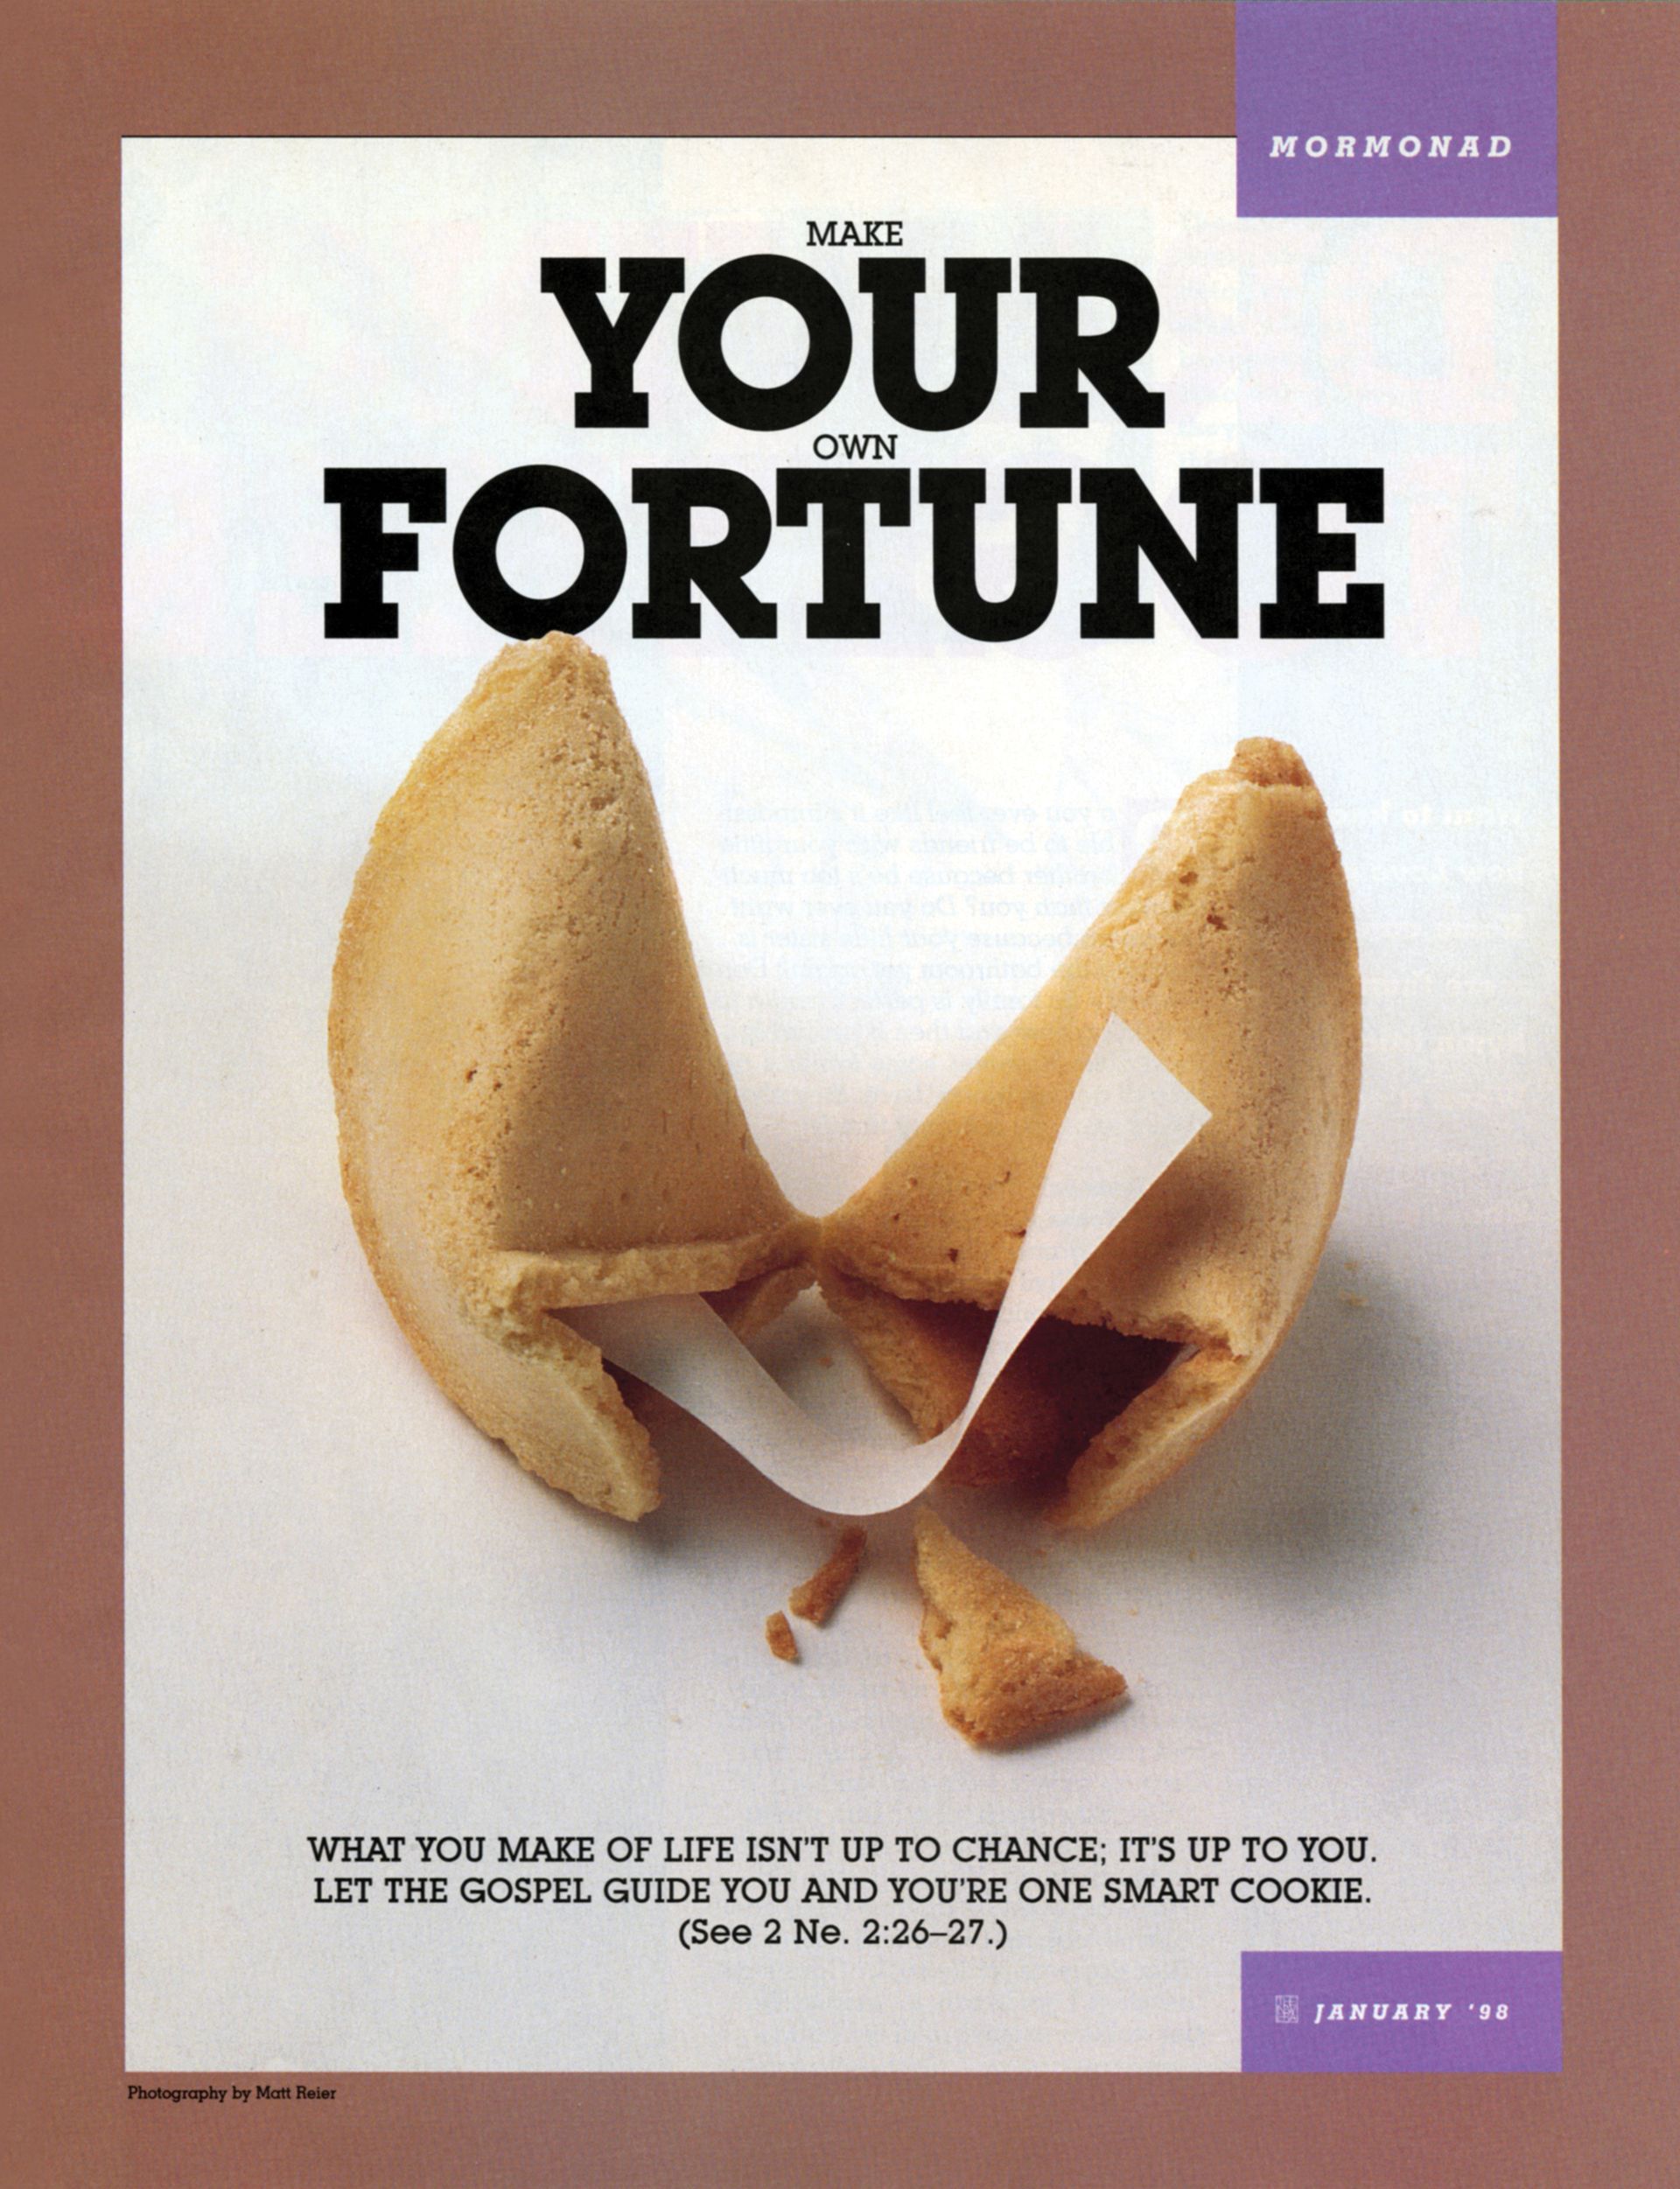 Make Your Own Fortune. What you make of life isn’t up to chance; it’s up to you. Let the gospel guide you, and you're one smart cookie. (See 2 Ne. 2:26–27.) Jan. 1998 © undefined ipCode 1.